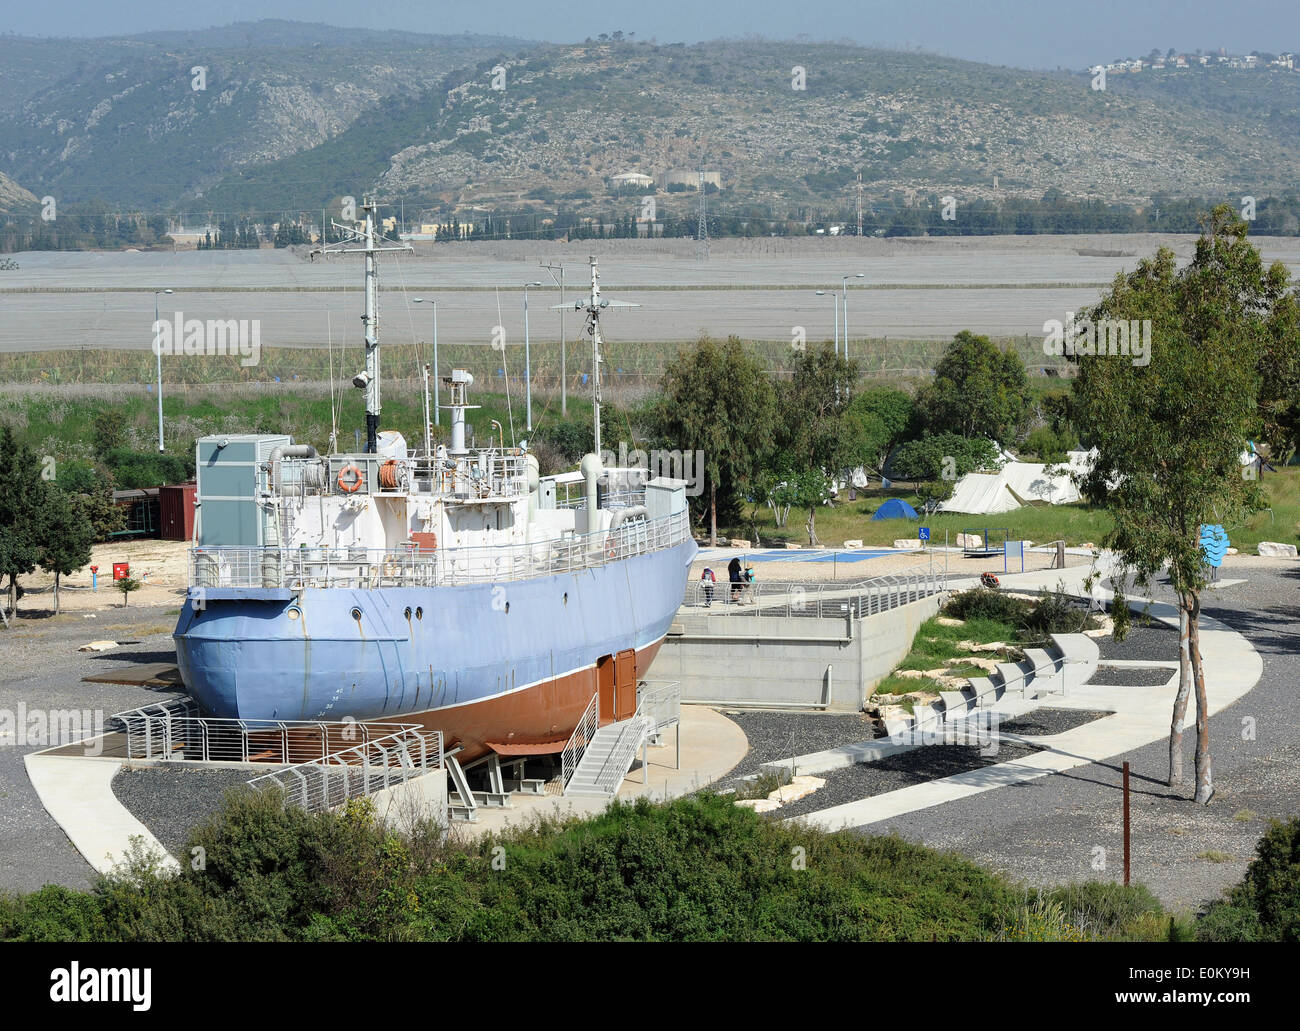 The photo from 08.04.2014 shows one of the two issued refugee ships at the site of Atlit Immigrants Detention Camp (Ha'apola Museum) in Haifa/Israel. From 1939 to 1948 the Camp served as a detention center for illegal Jewish immigrants. Stock Photo